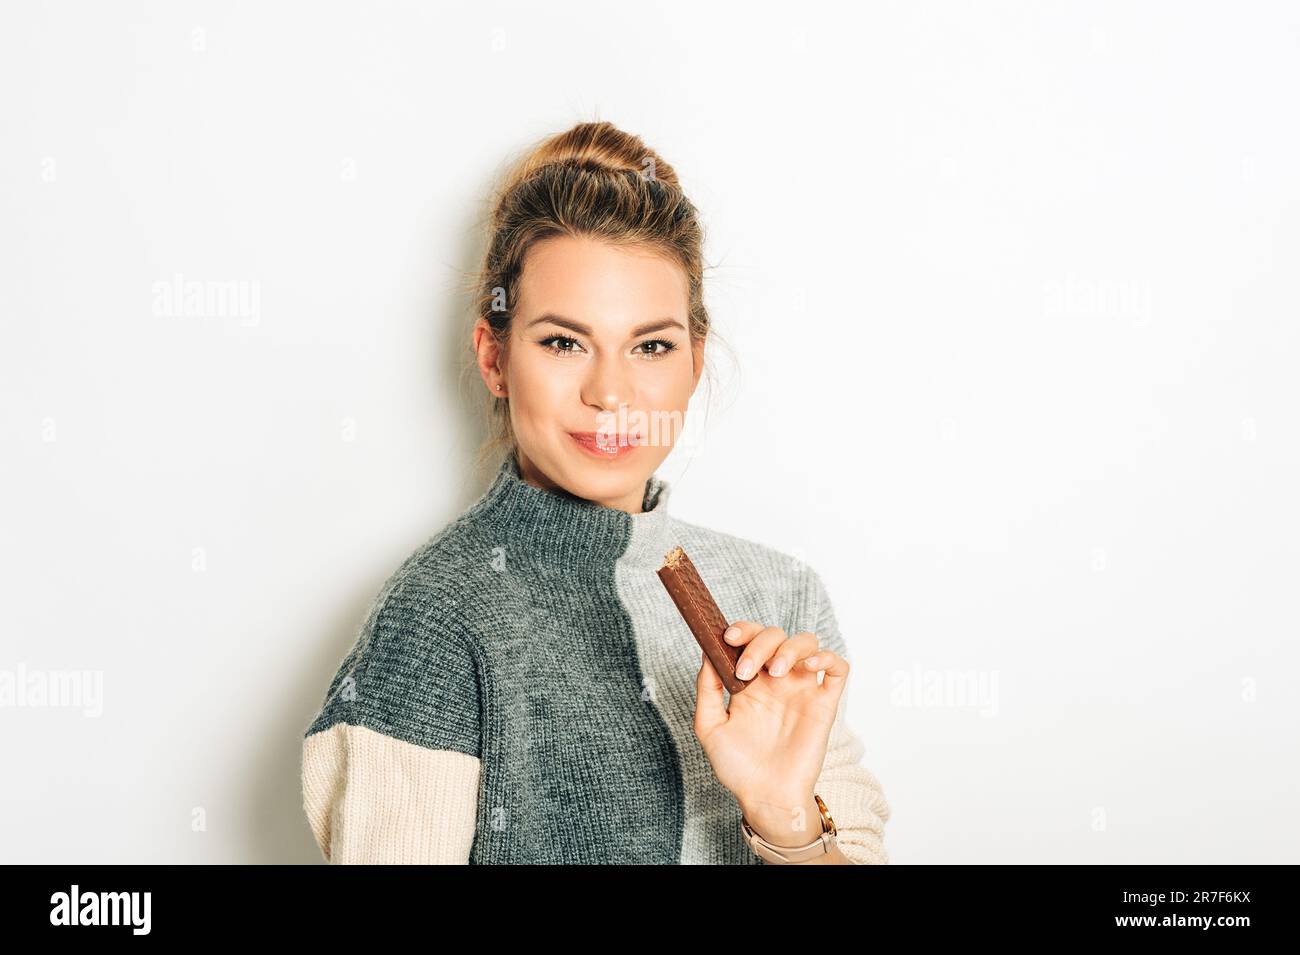 Pretty young woman eating chocolate bar, studio image taken on white background Stock Photo